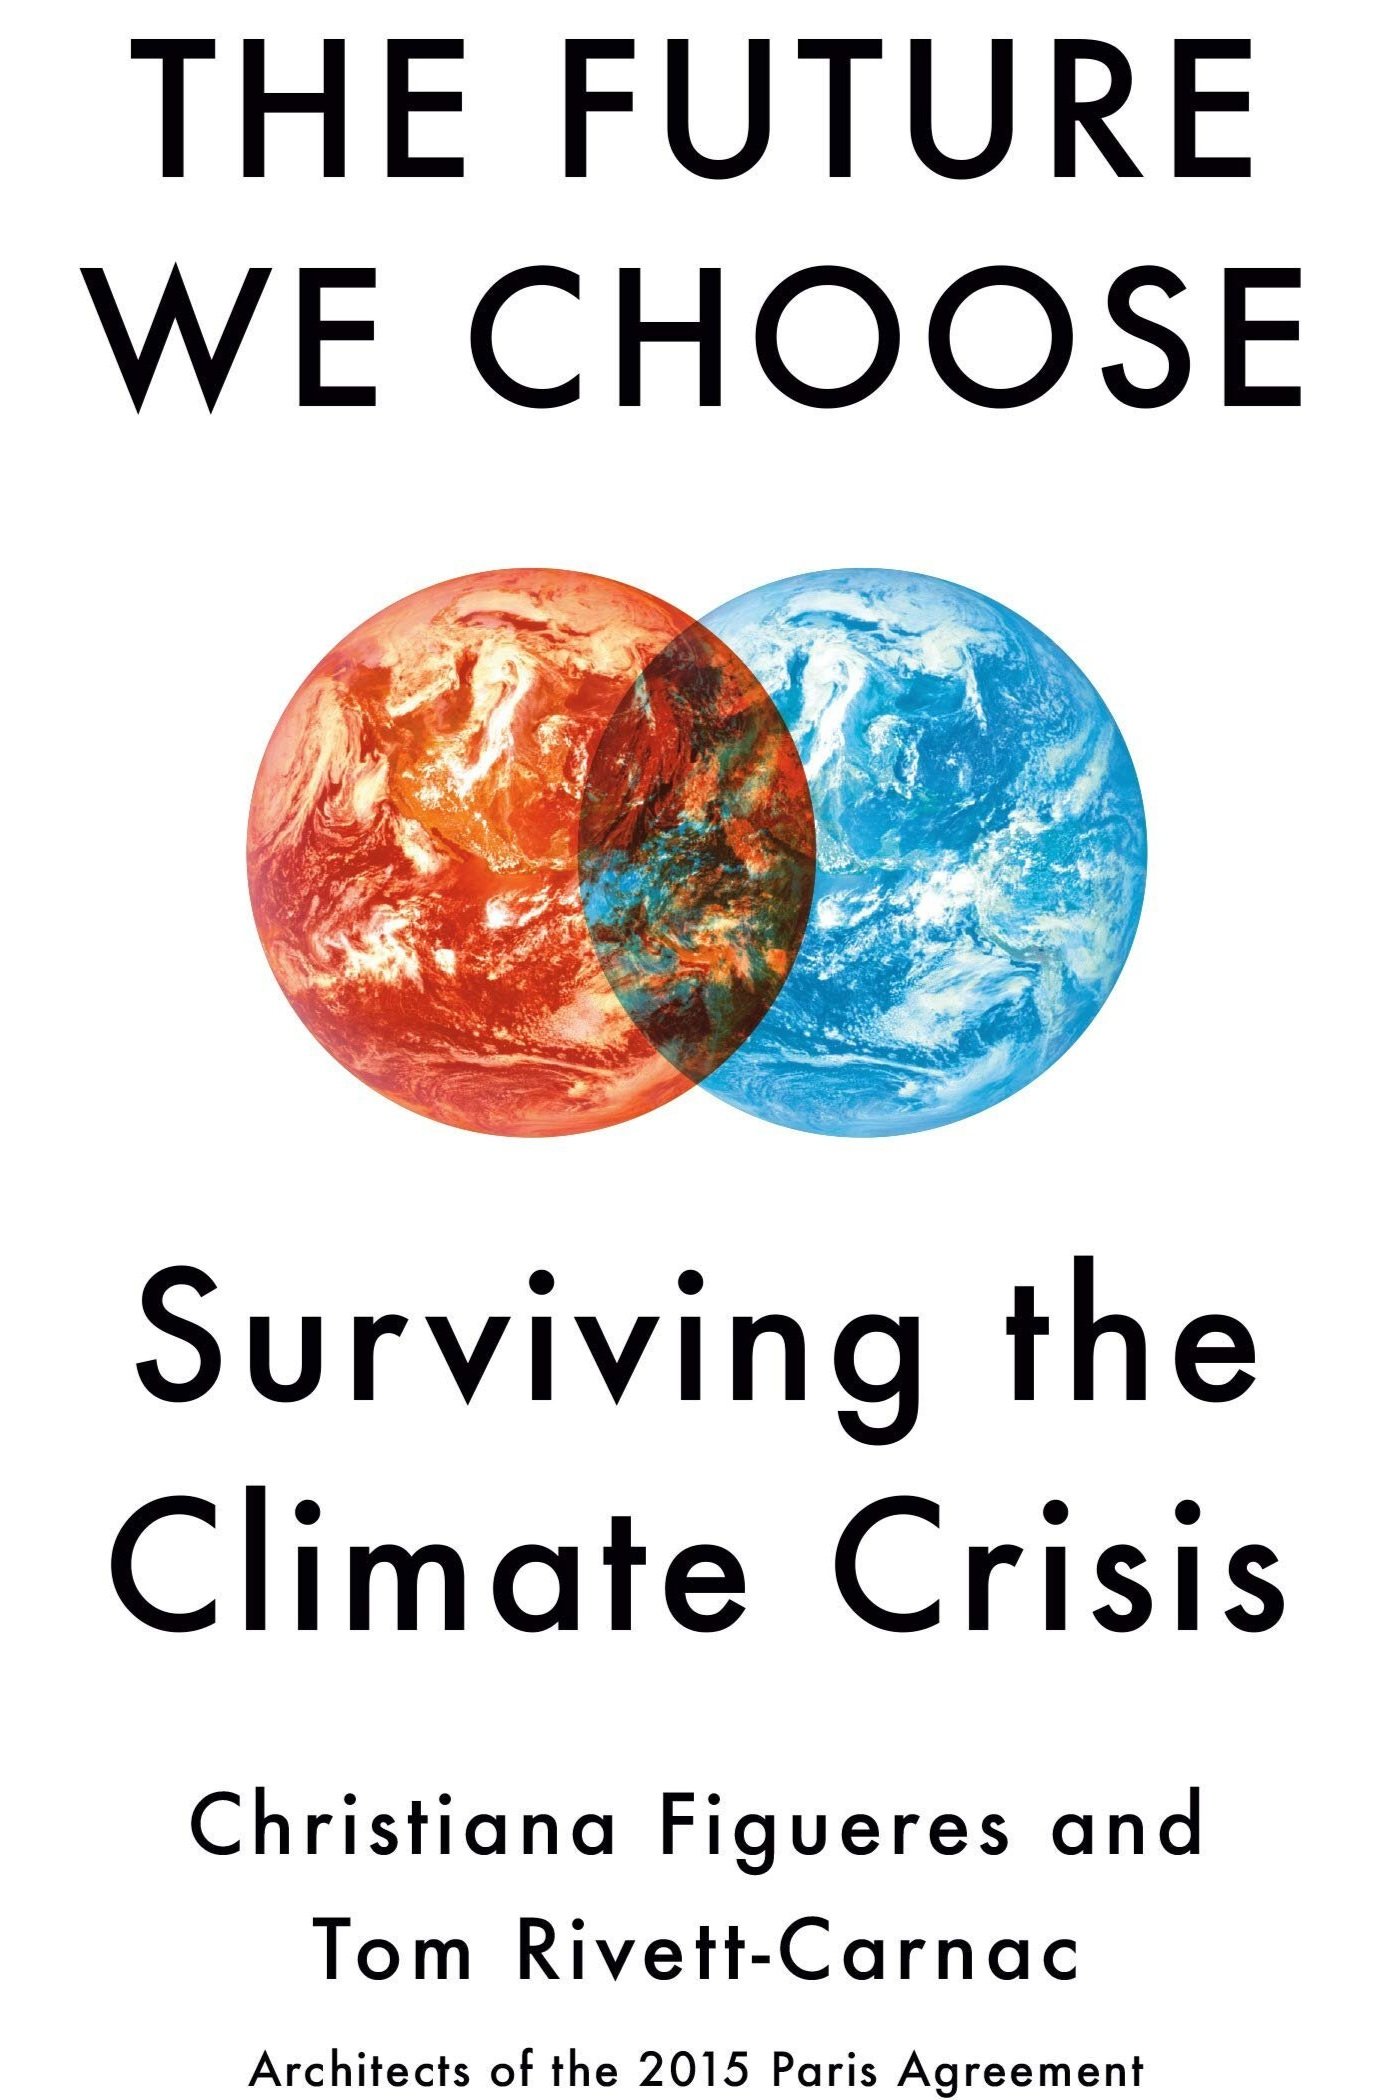 The Future We Choose: The Stubborn Optimist's Guide to the Climate Crisis by Christiana Figueres and Tom Rivett-Carnac